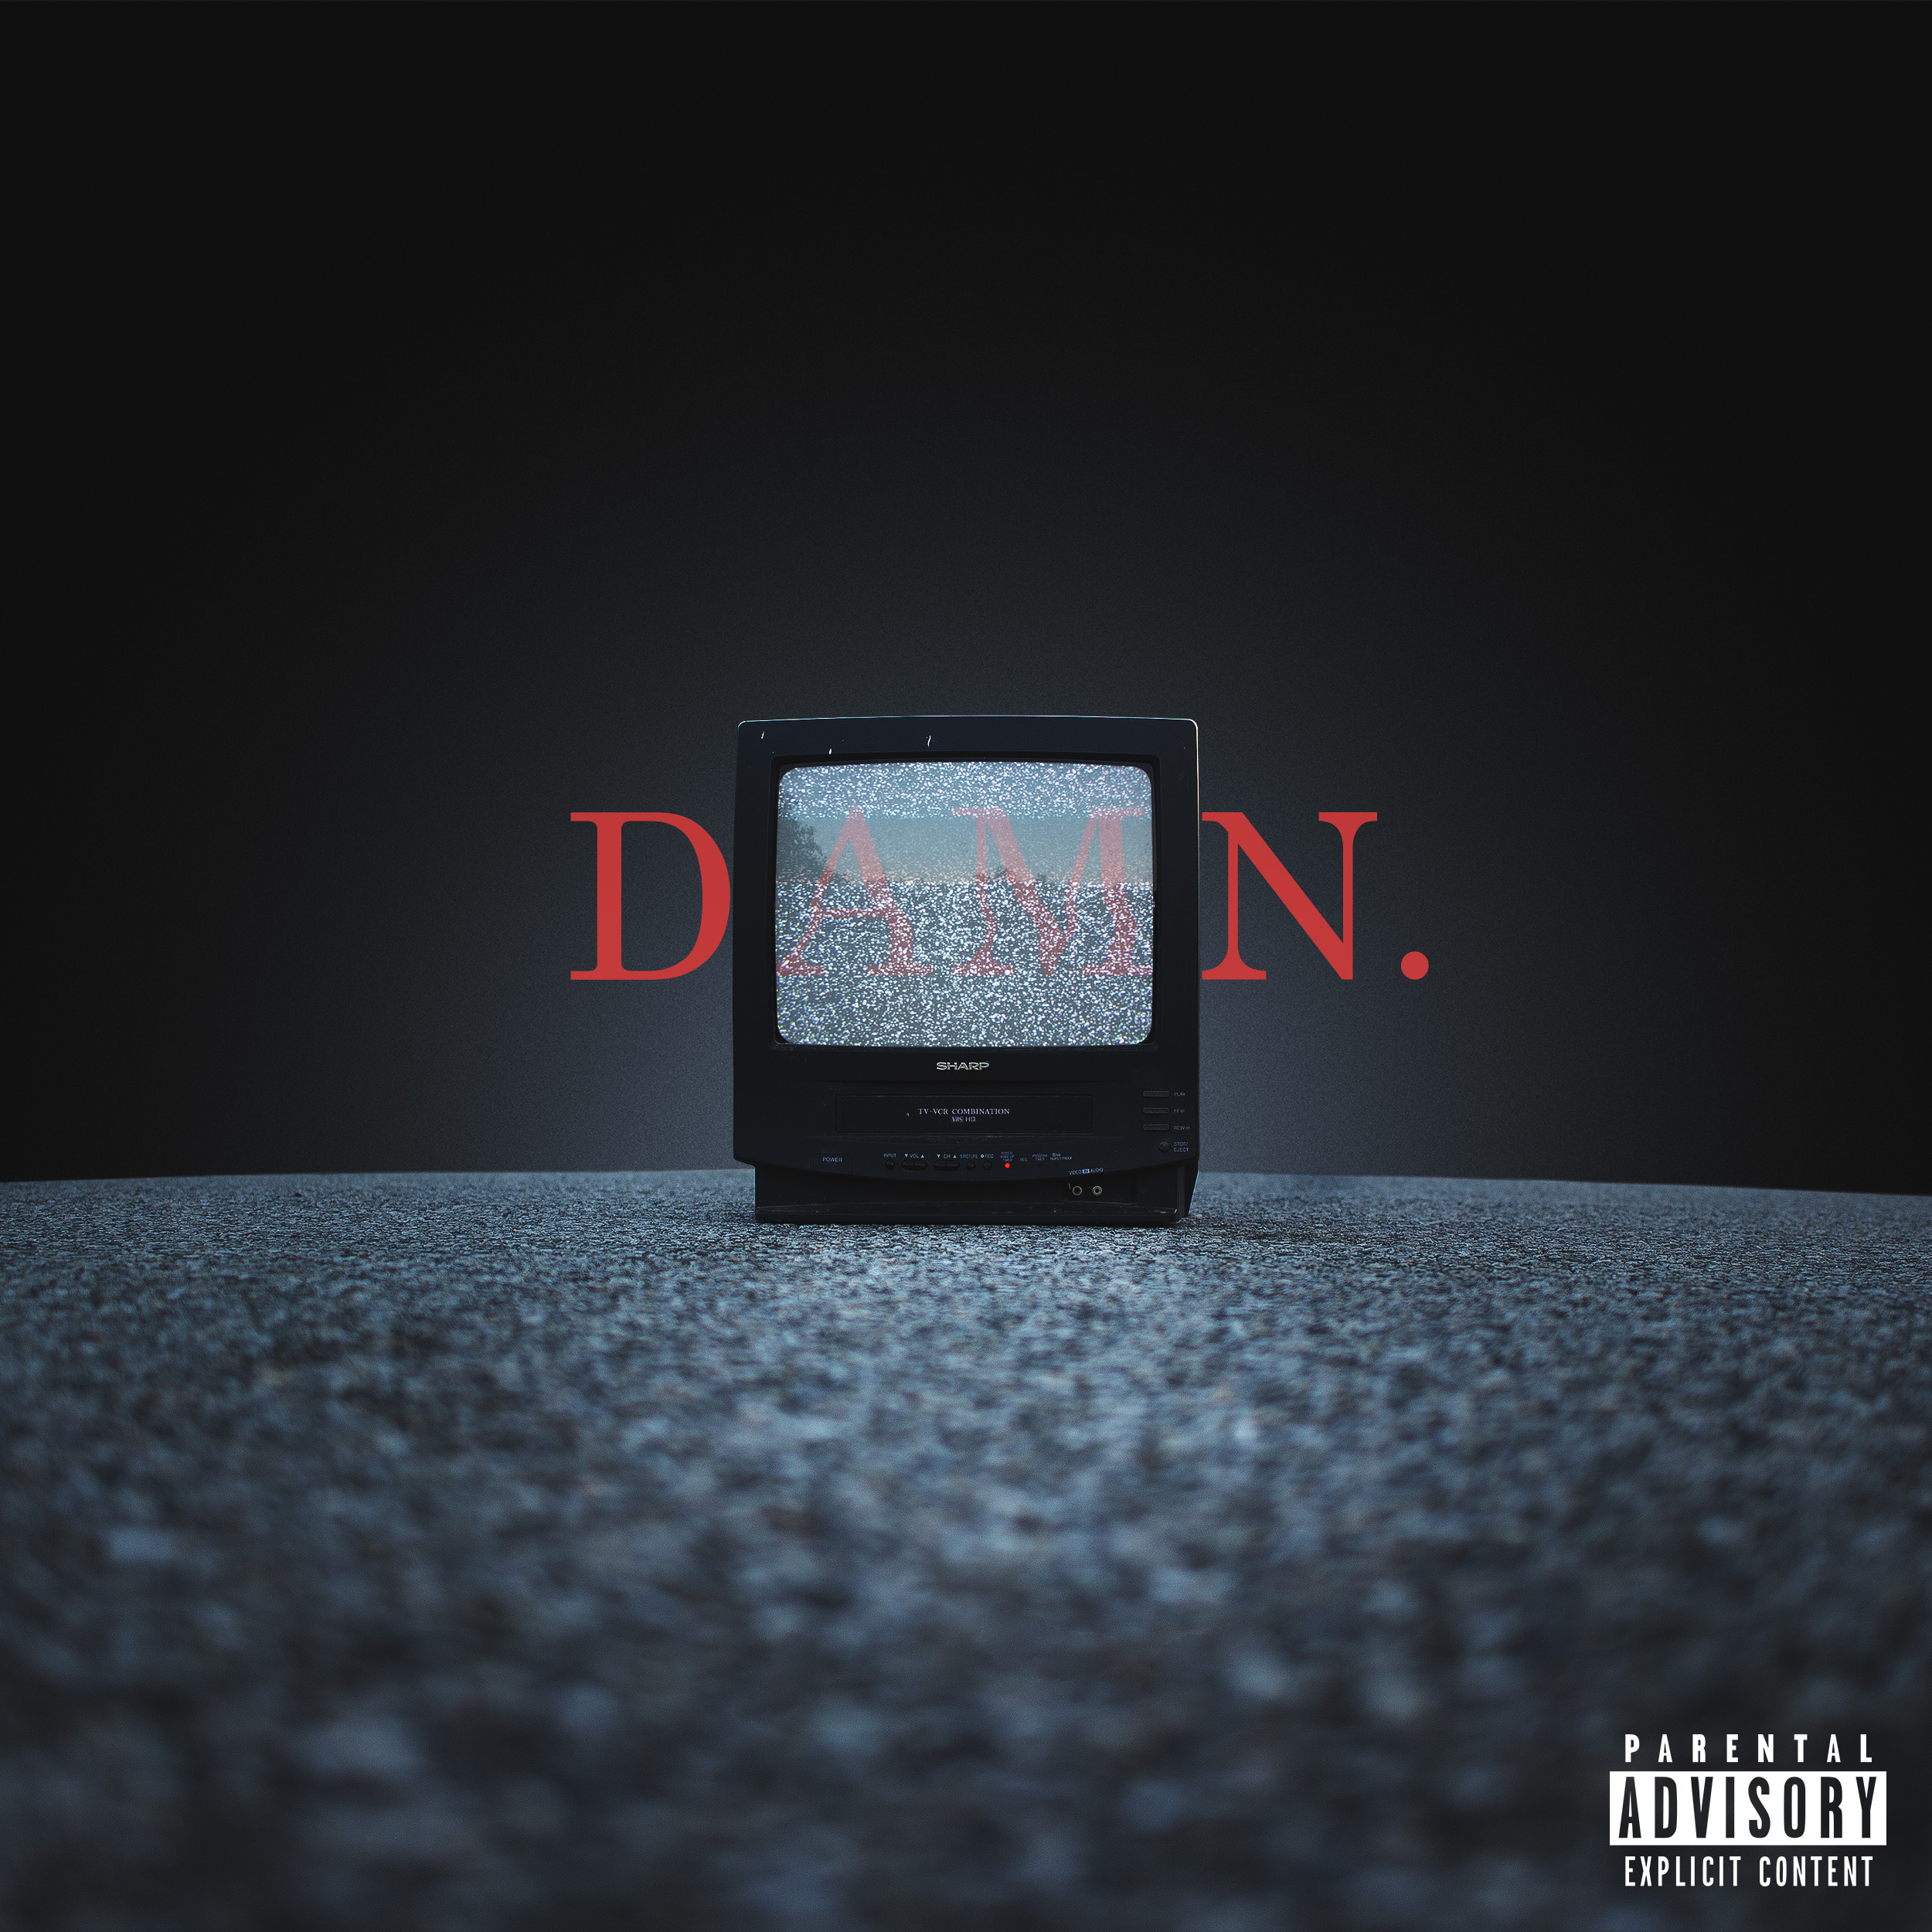 TV on a street pavement in the style of an album cover. Text reads: 'DAMN.'.